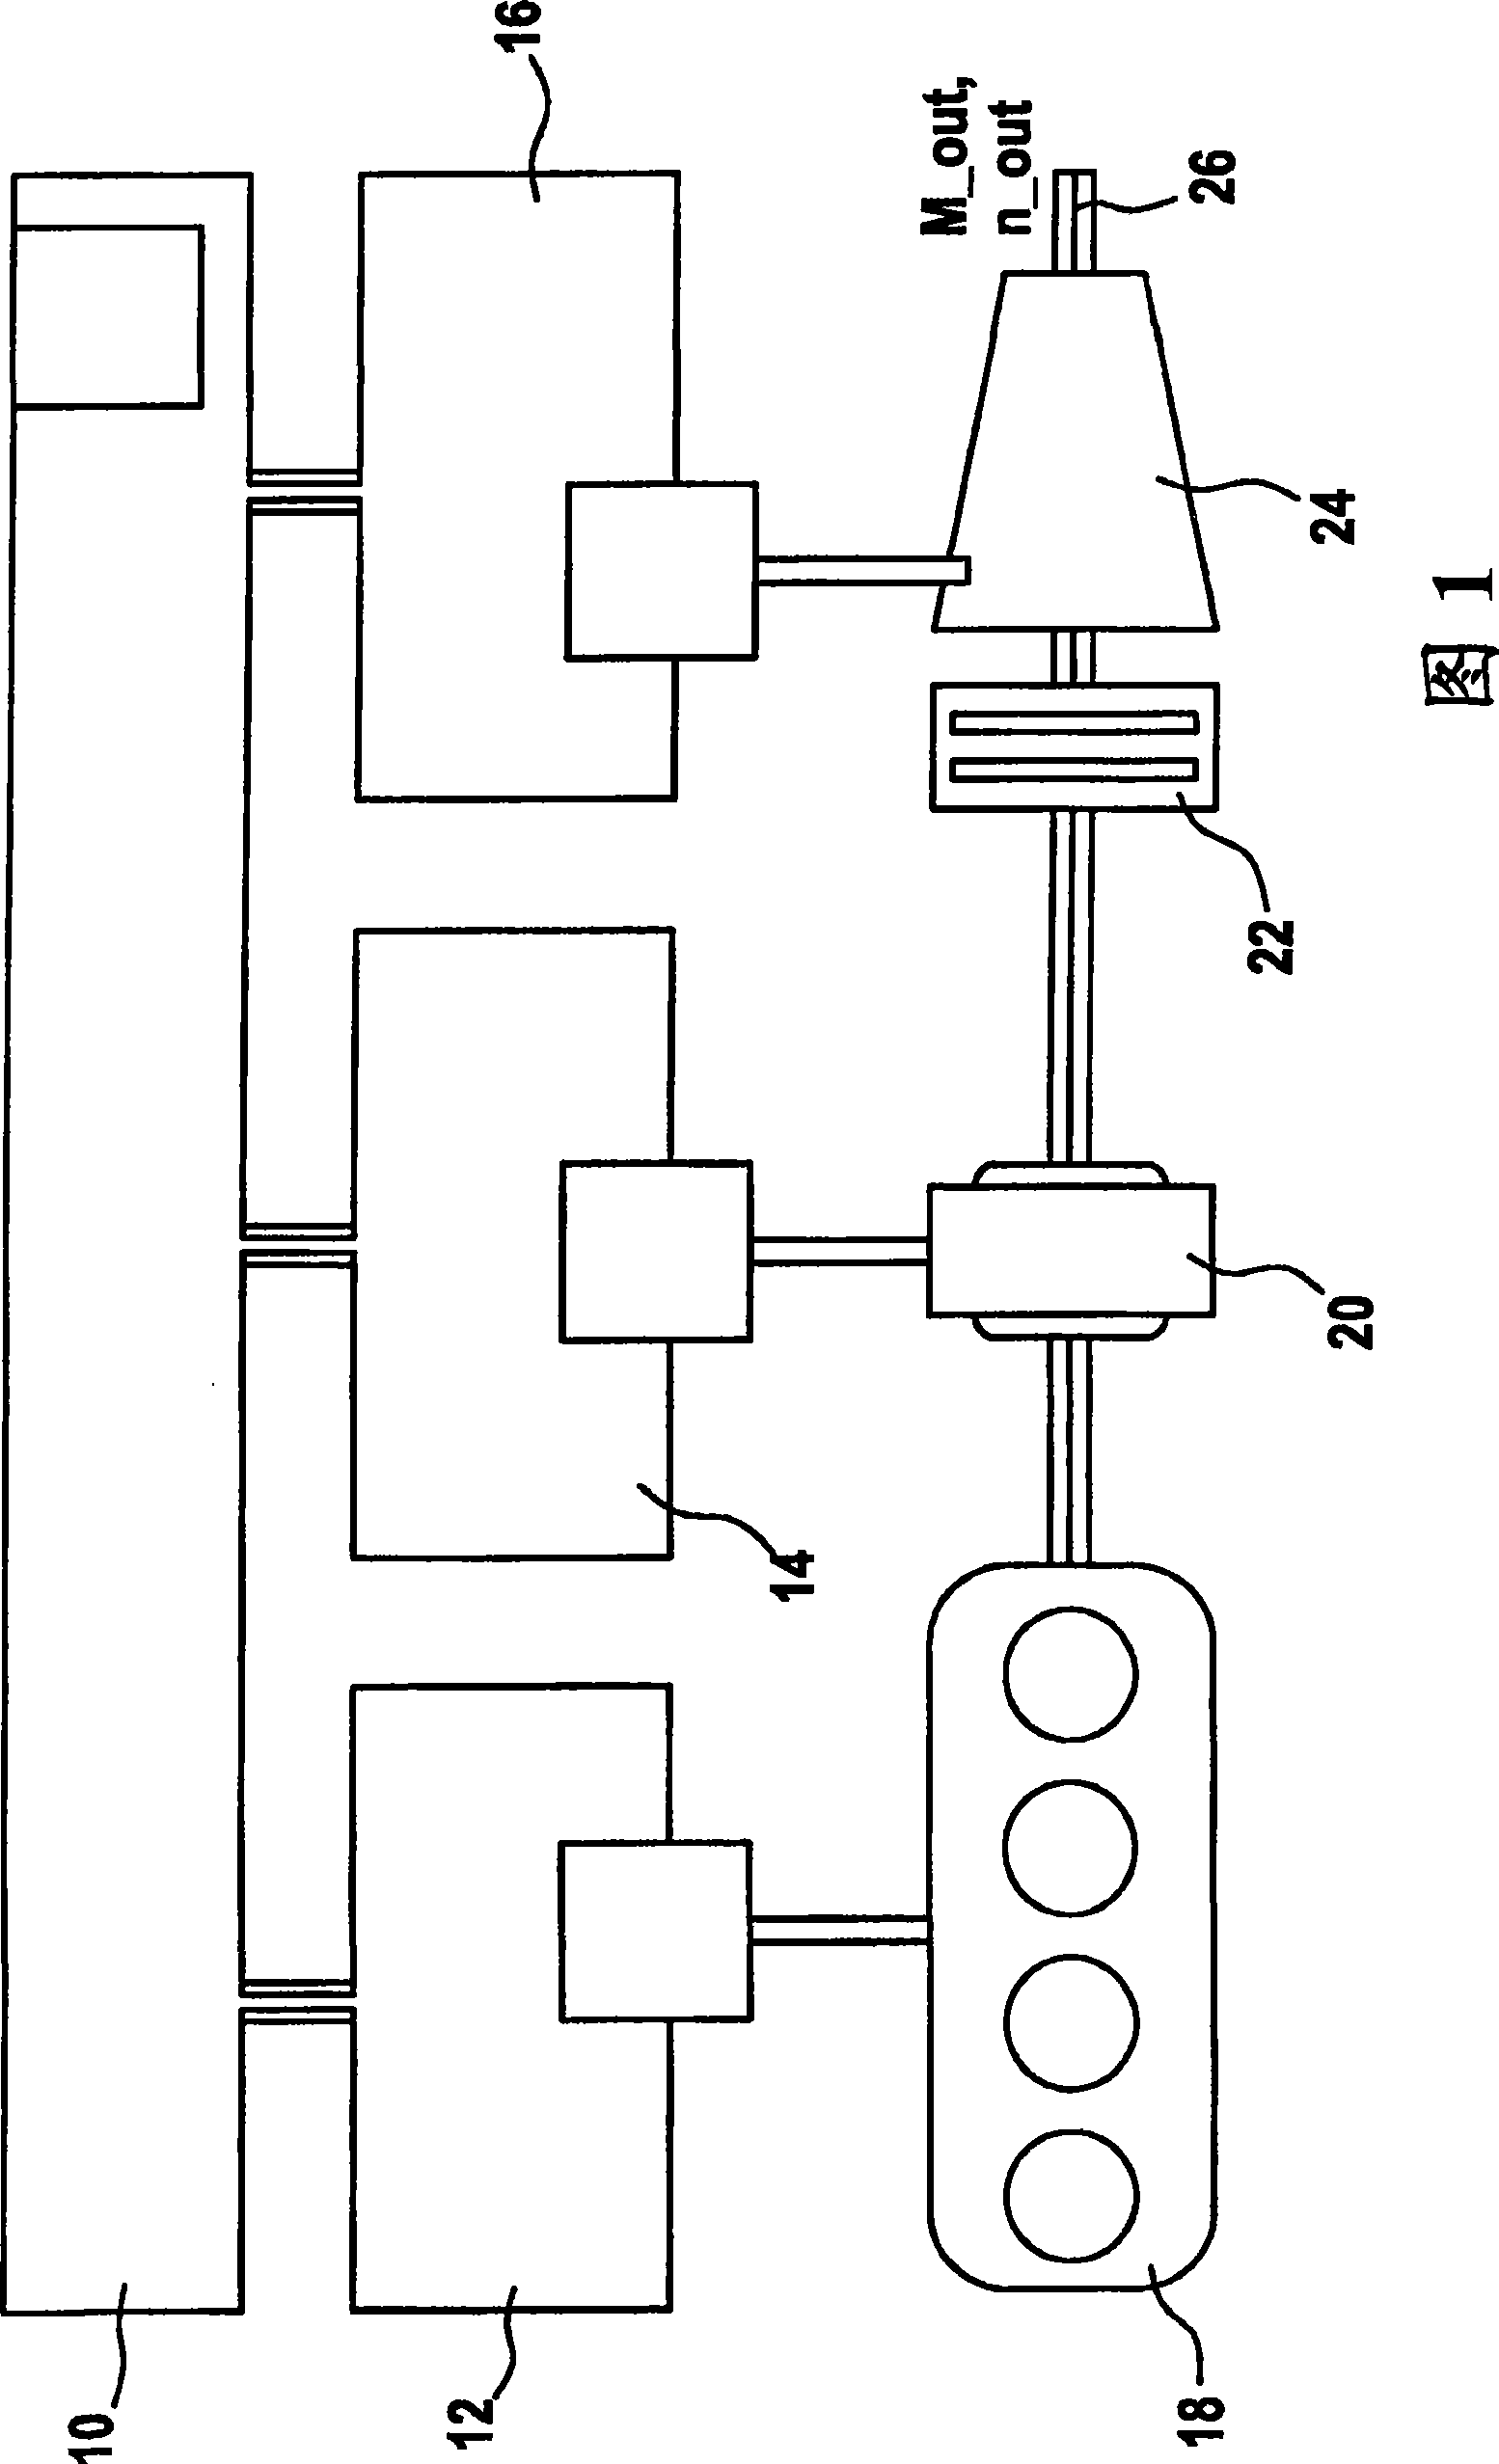 Defined internal combustion engine operation for vehicles with hybrid drive